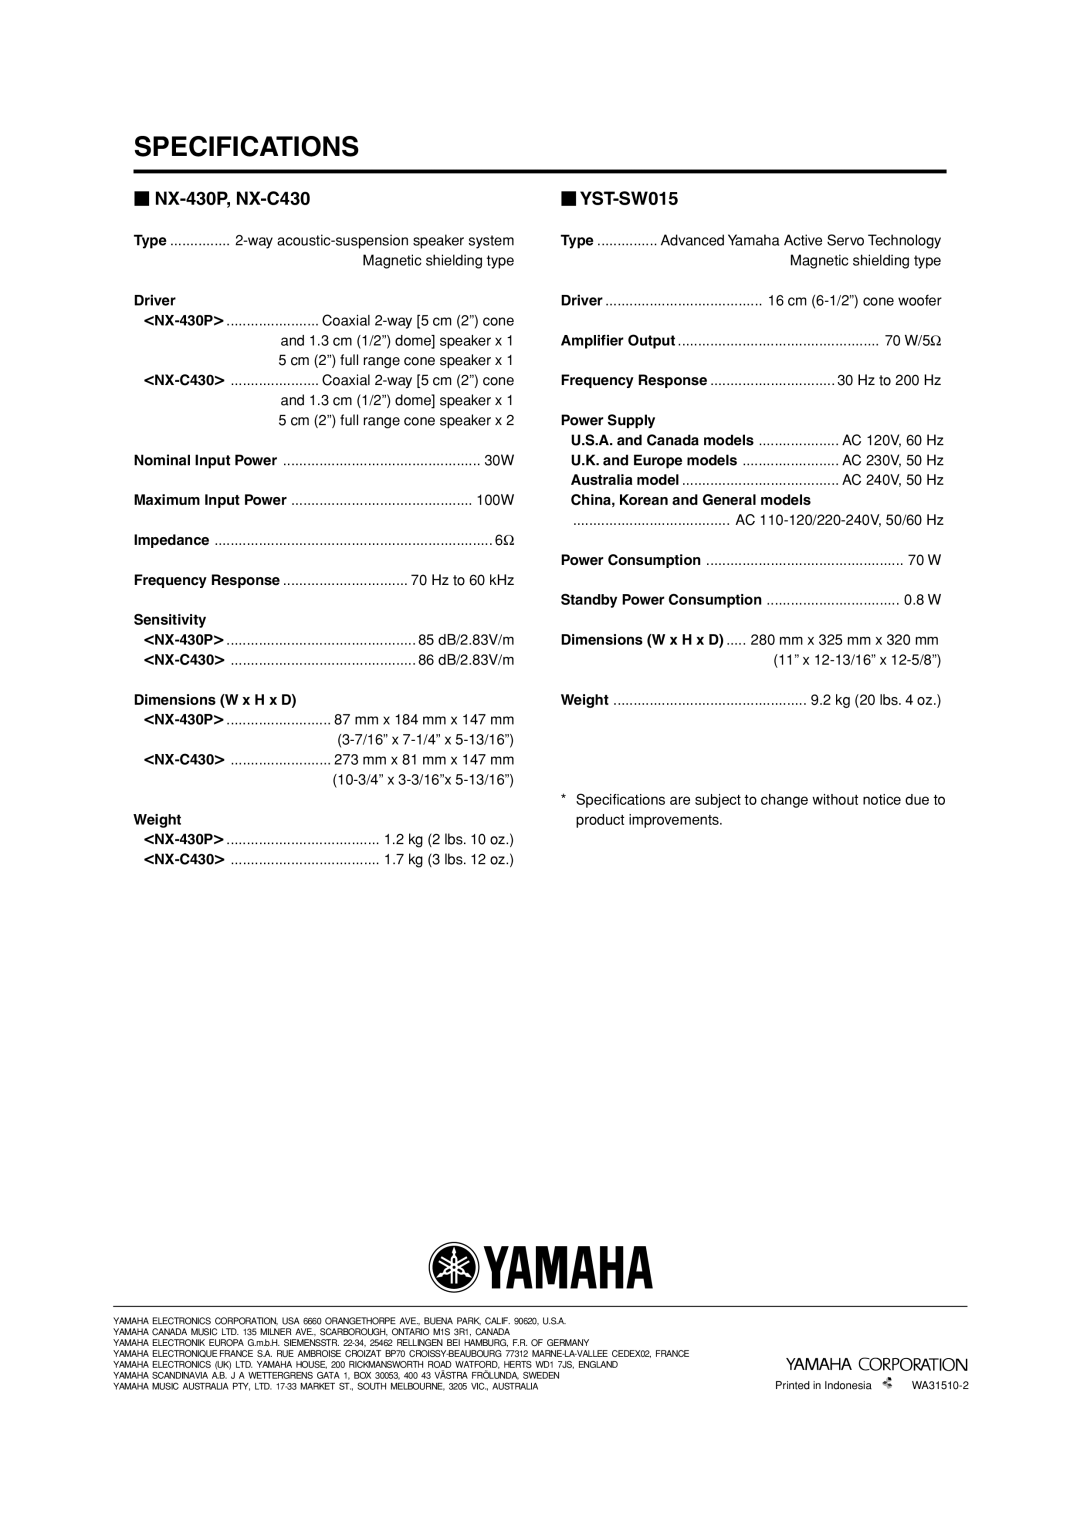 Yamaha HTR-5940 owner manual Specifications, NX-430P, NX-C430, YST-SW015 